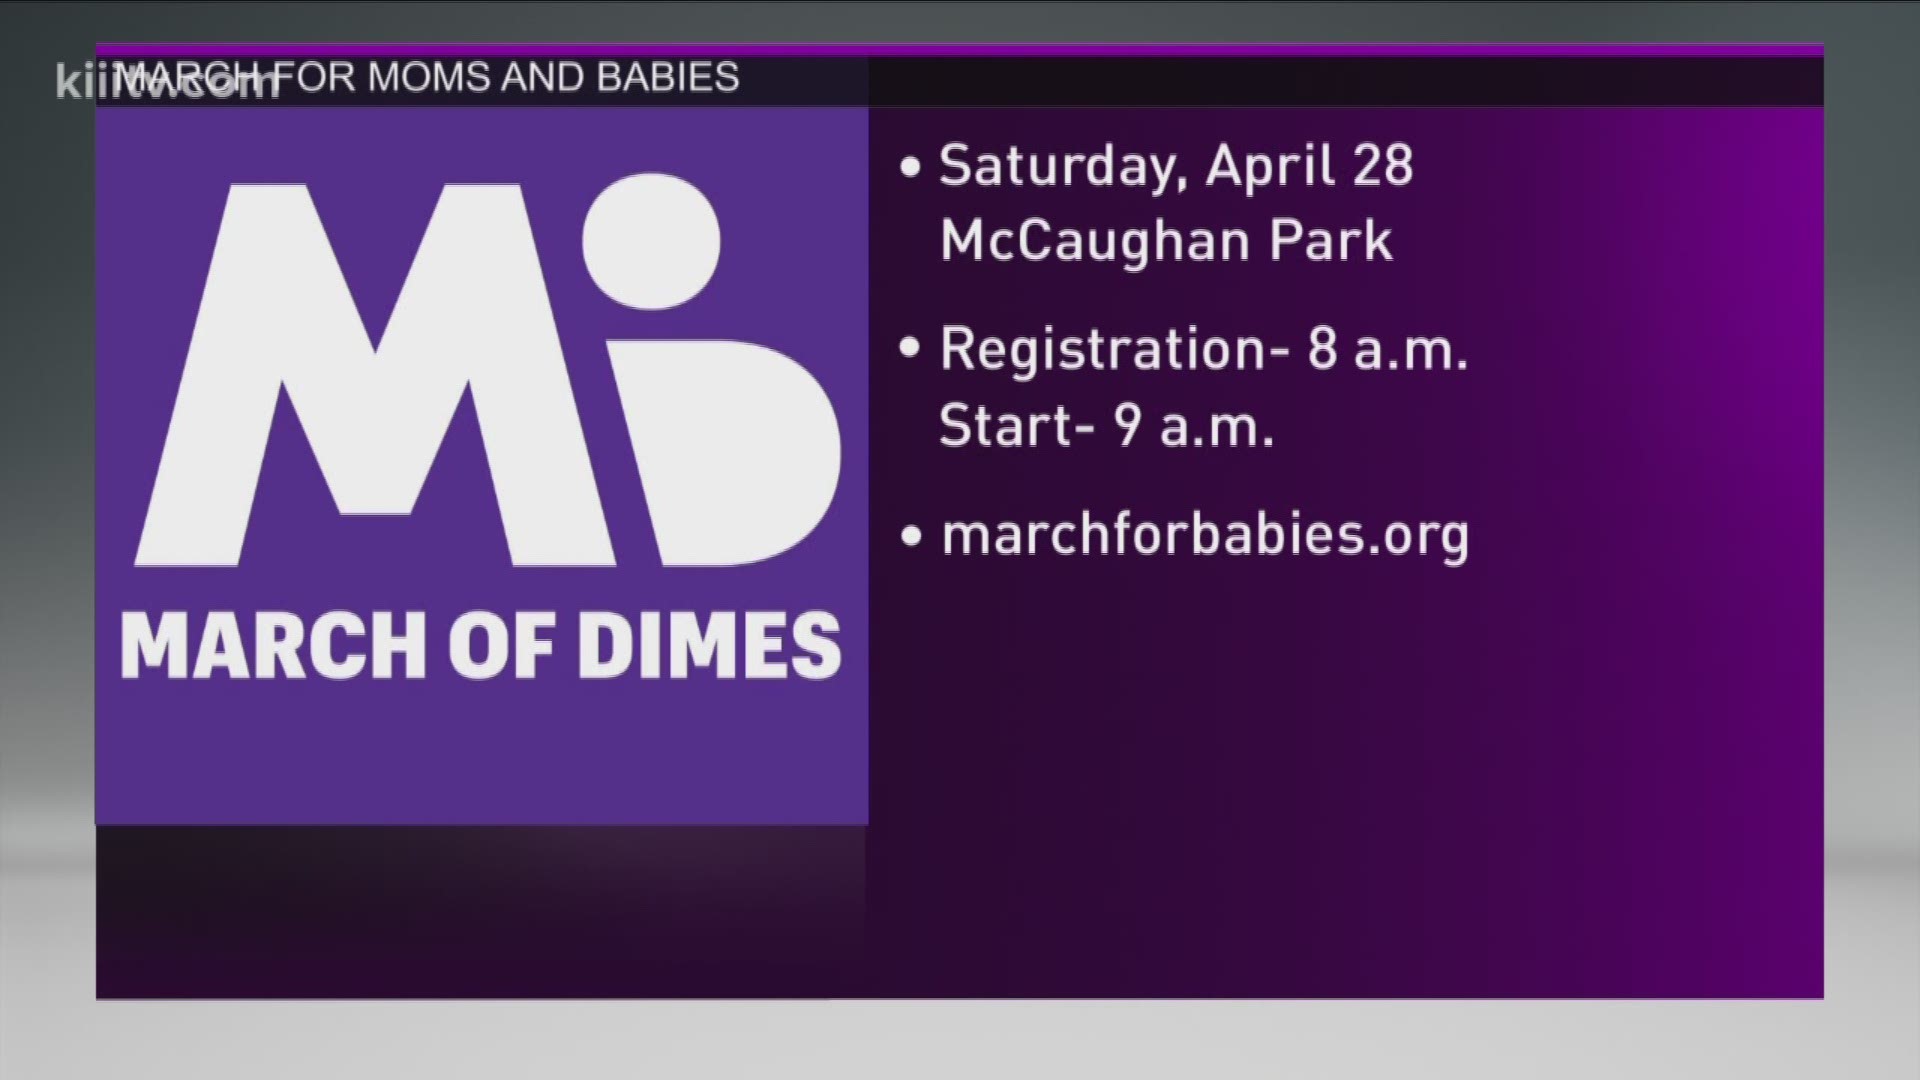 March of Dimes is celebrating 80 years.